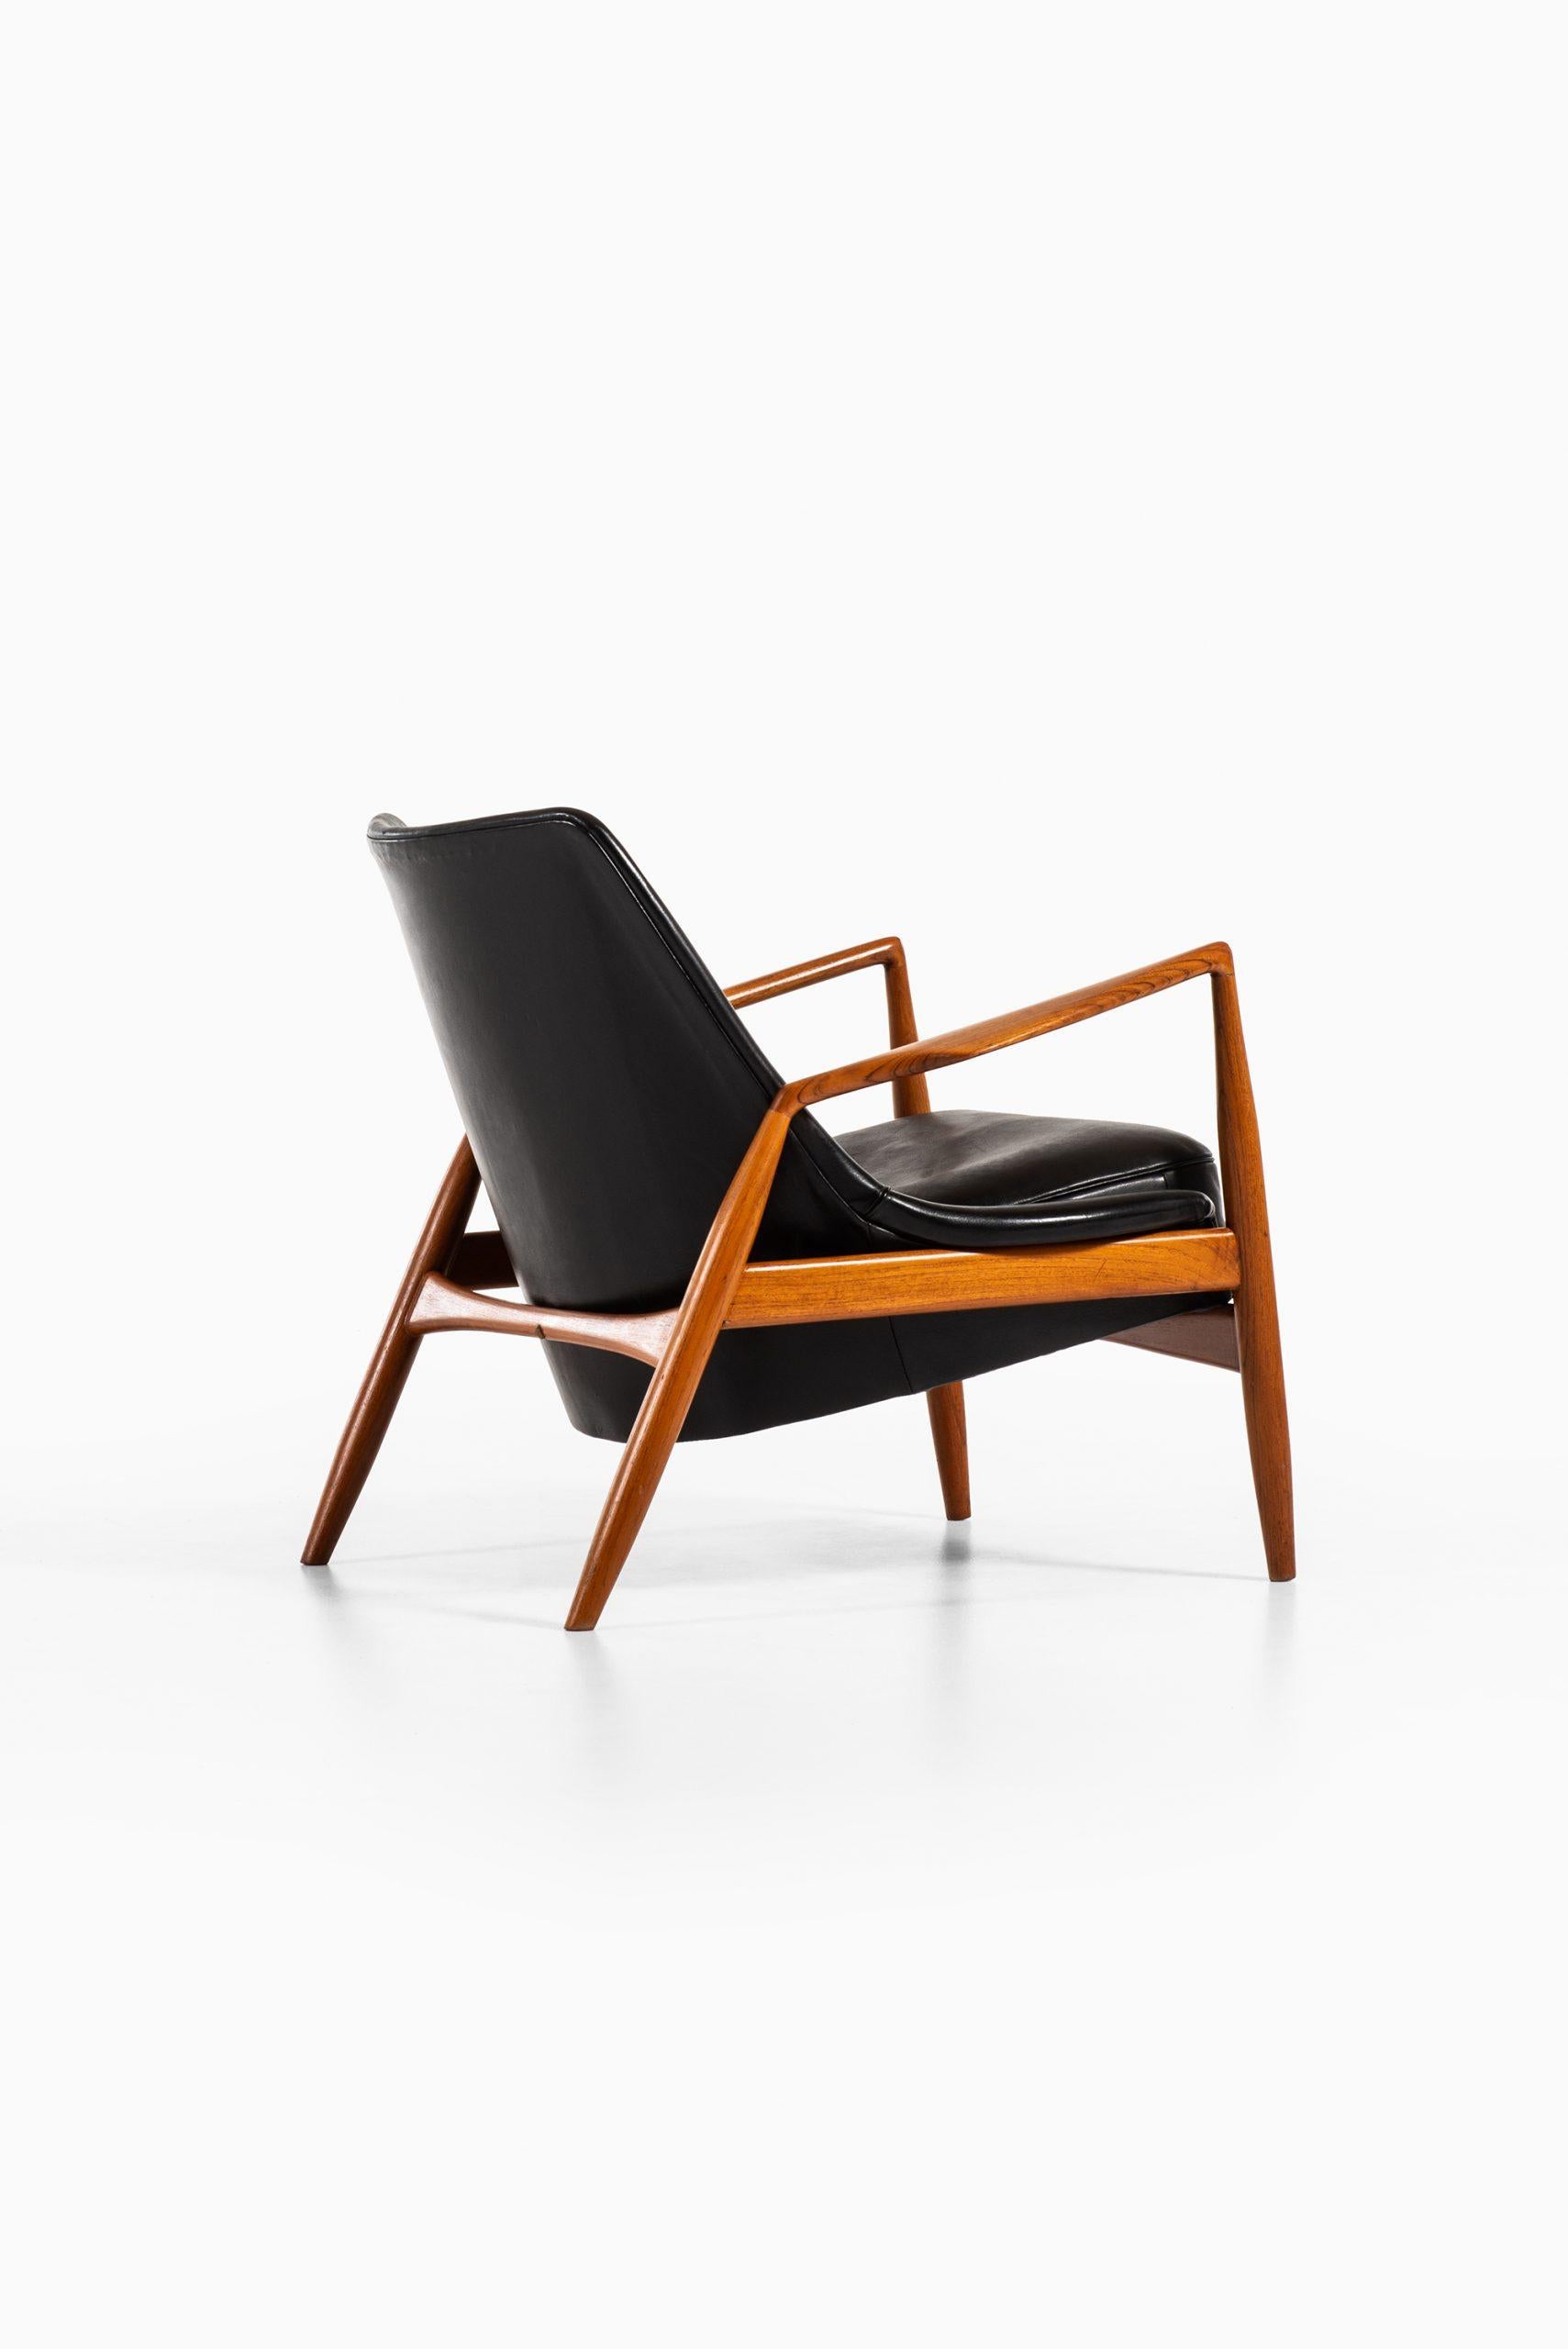 Mid-20th Century Ib Kofod-Larsen Easy Chair Model Sälen / Seal Produced by OPE in Sweden For Sale